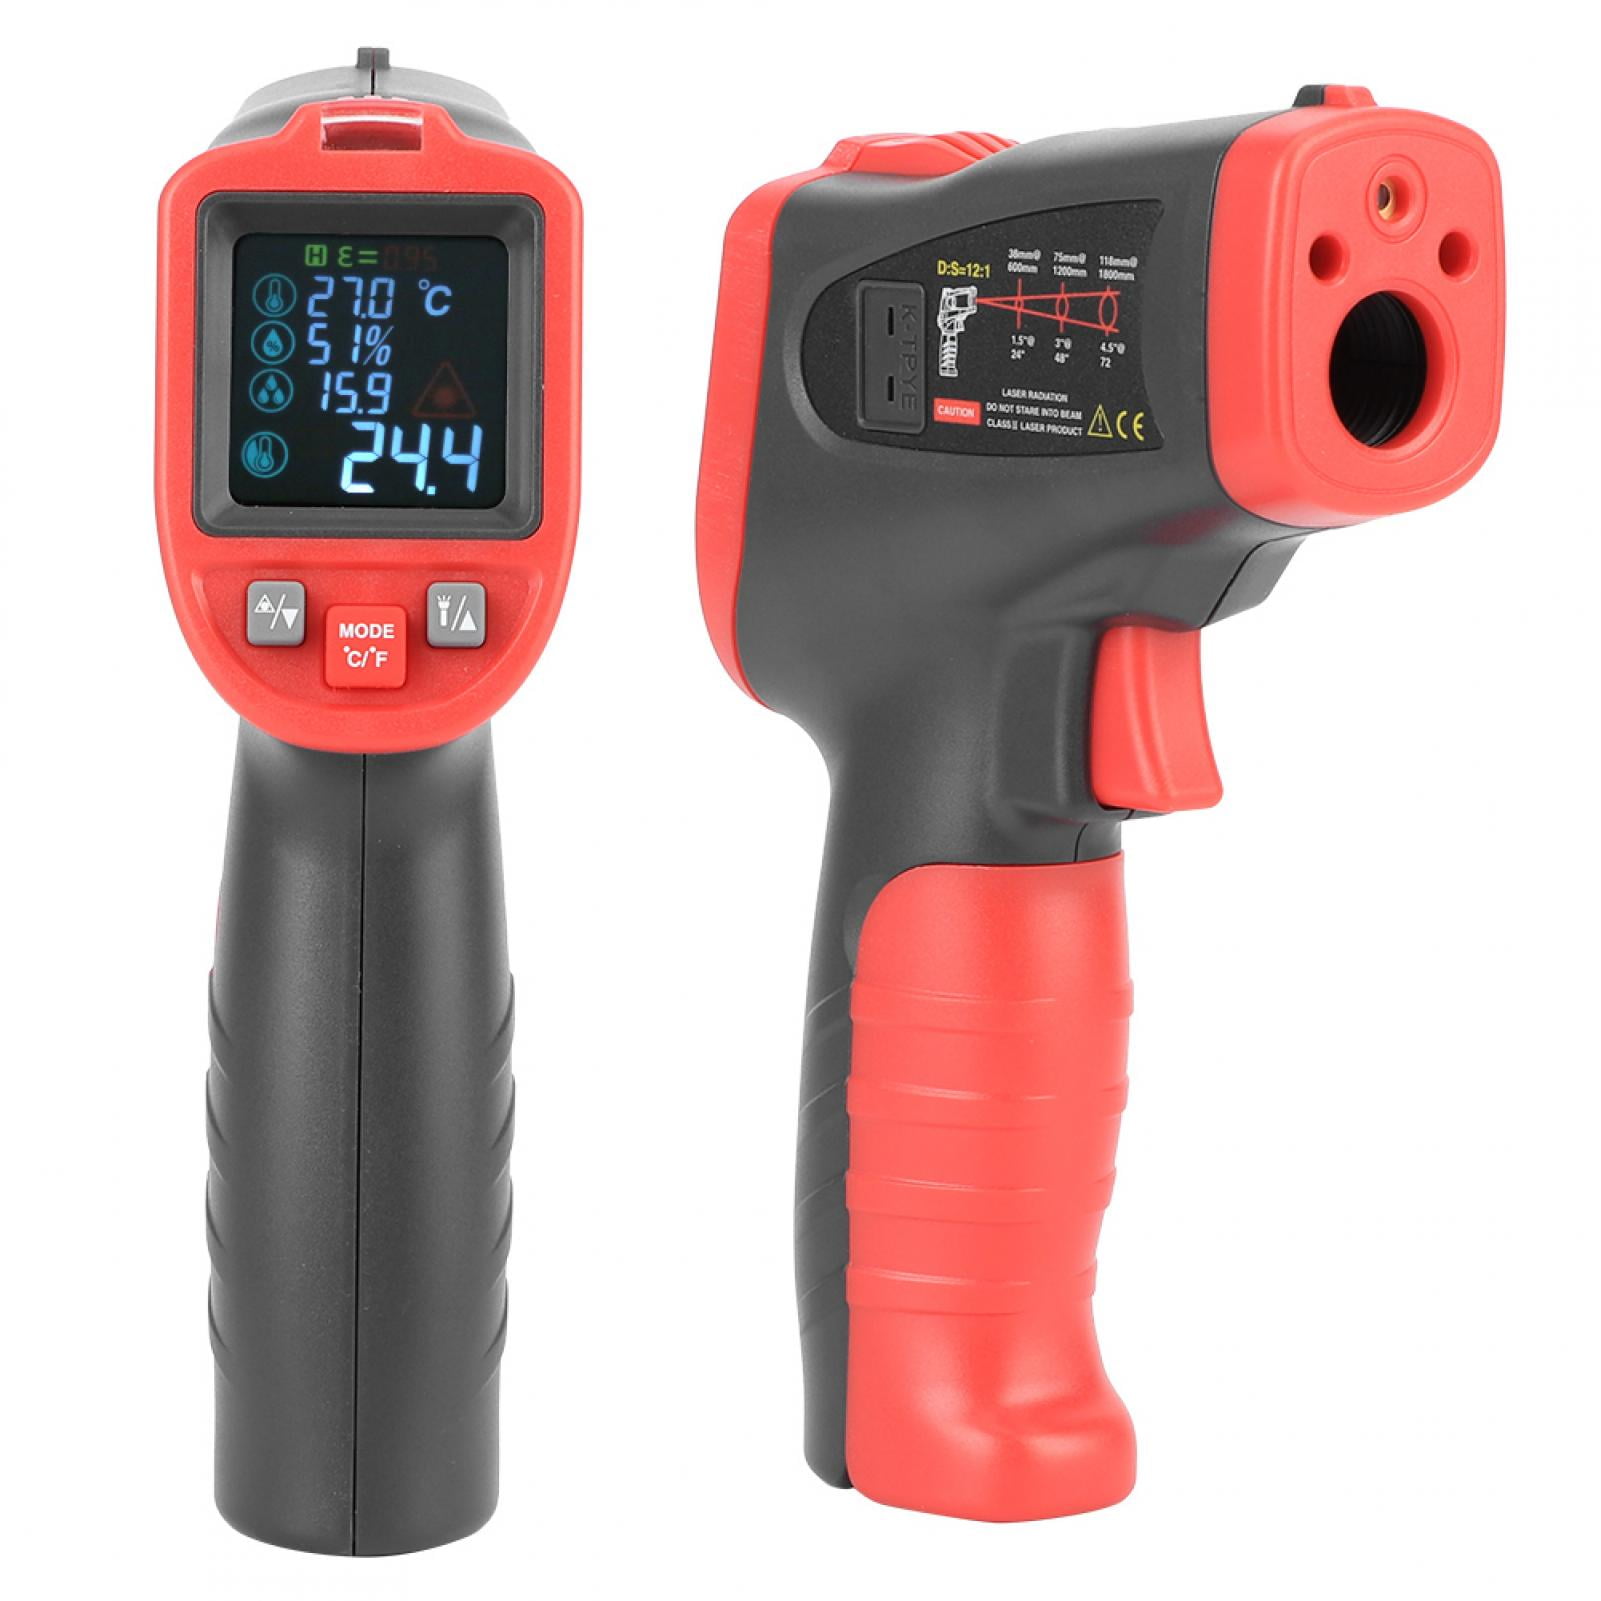 550 Non-Contact Temperature Gun Details about   AstroAI Digital Laser Infrared Thermometer 